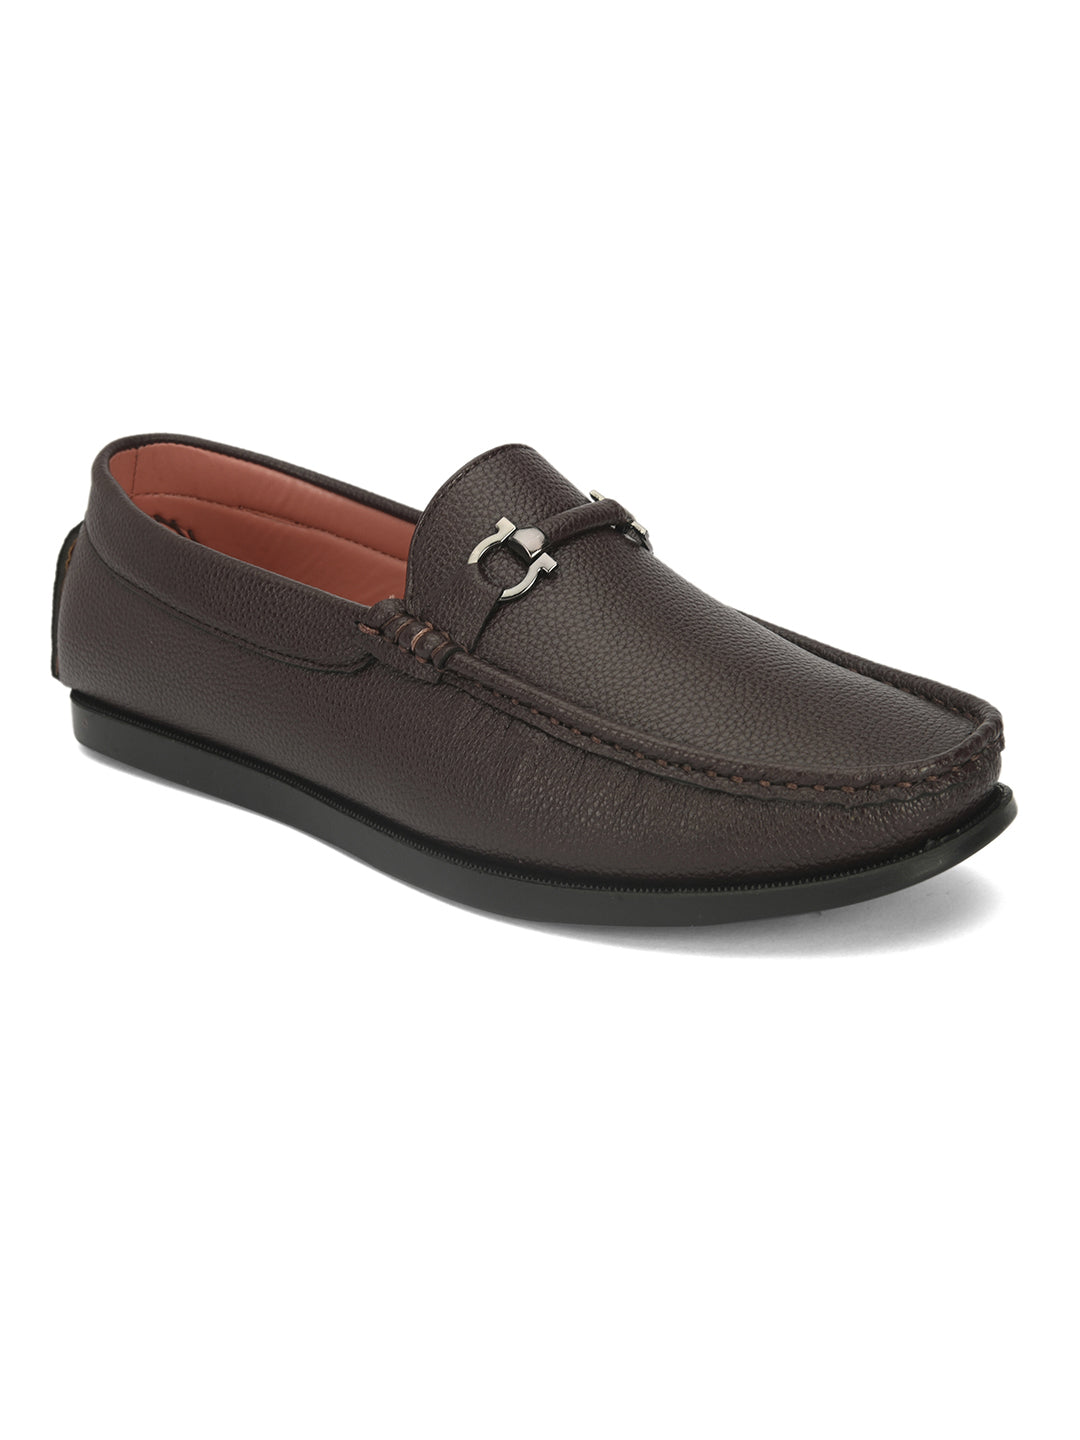 Guava Men's Brown Casual Slip On Driving Loafers (GV15JA773)